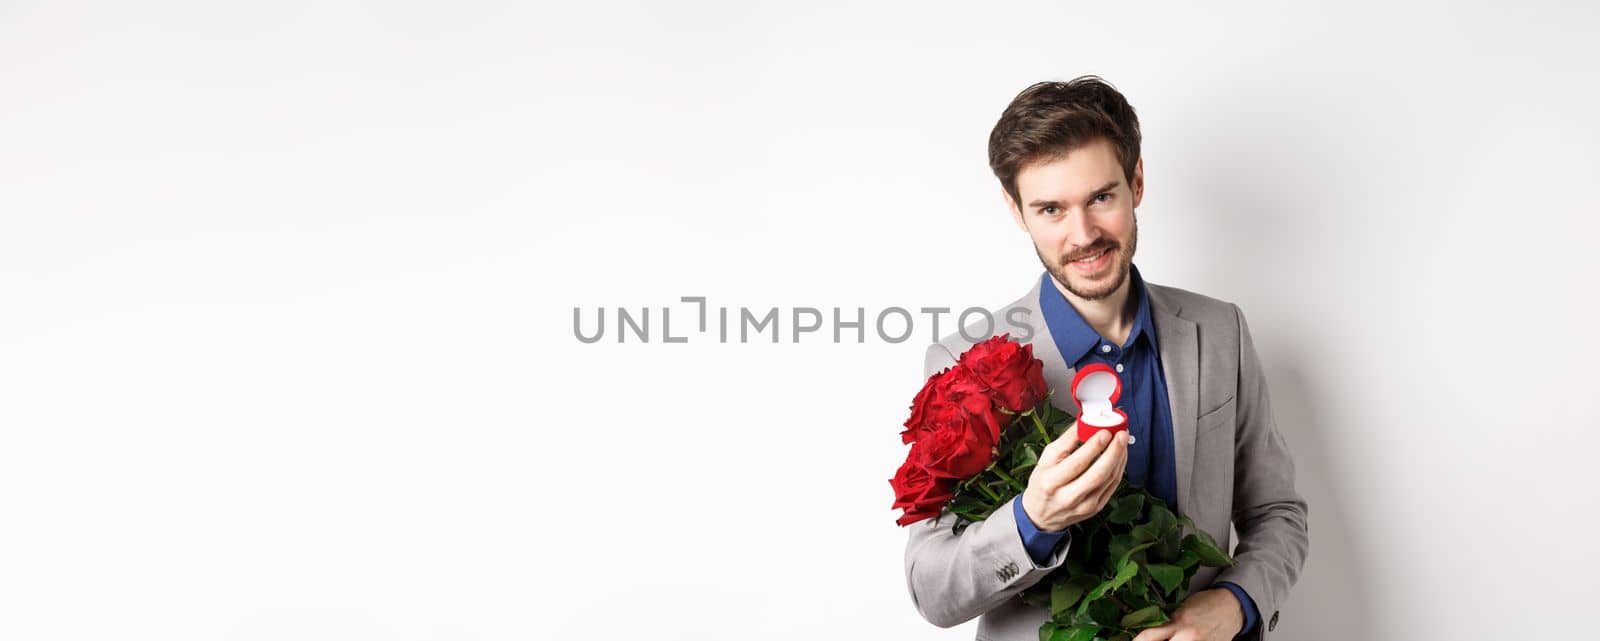 Romantic man with boquet of red roses asking to marry him, holding engagement ring and looking confident at camera, standing in suit over white background.